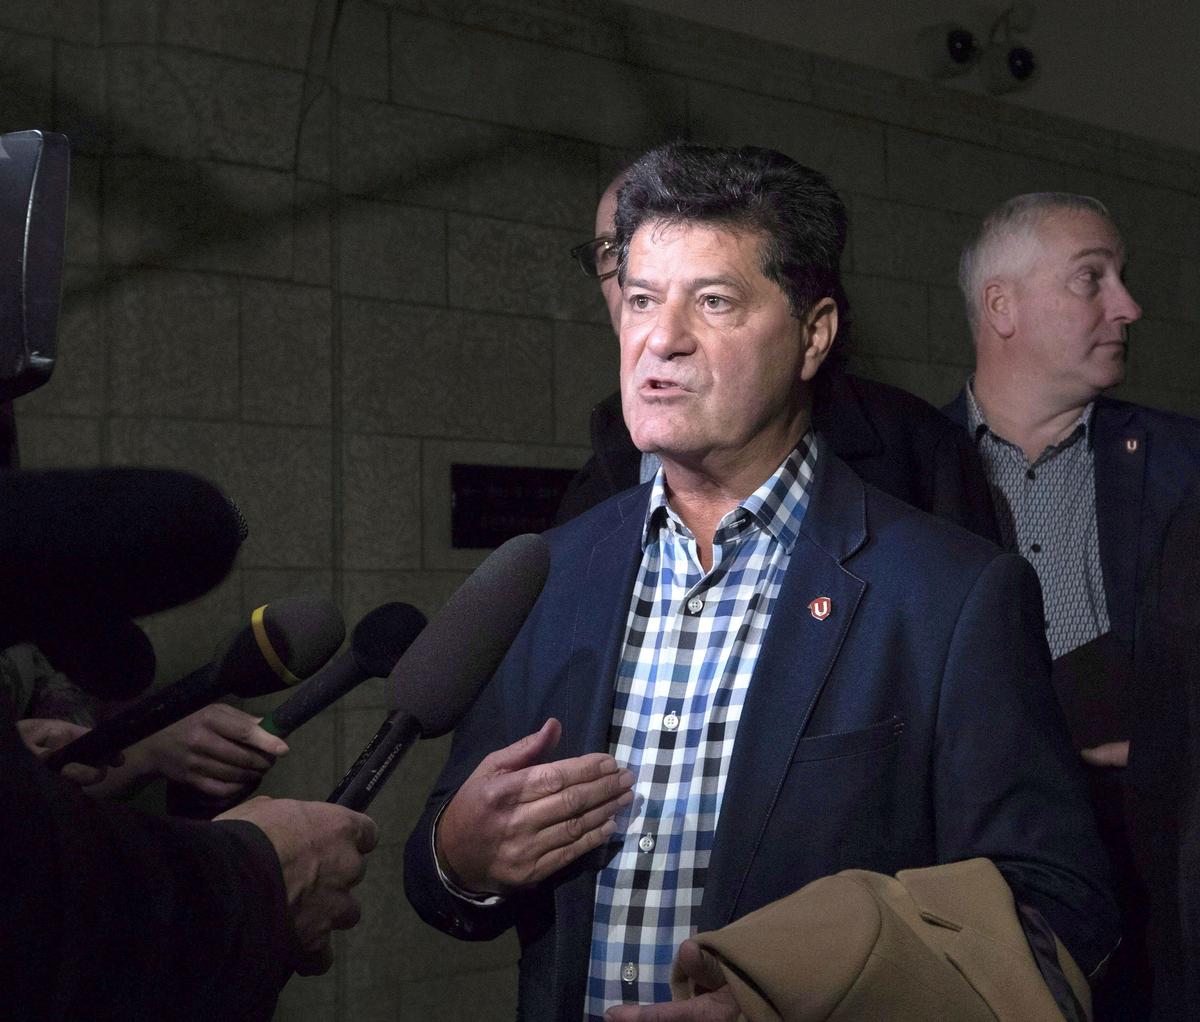 Unifor president Jerry Dias speaks with reporters after meeting with Prime Minister Justin Trudeau on Parliament Hill on Nov. 27, 2018. (The Canadian Press/Fred Chartrand)